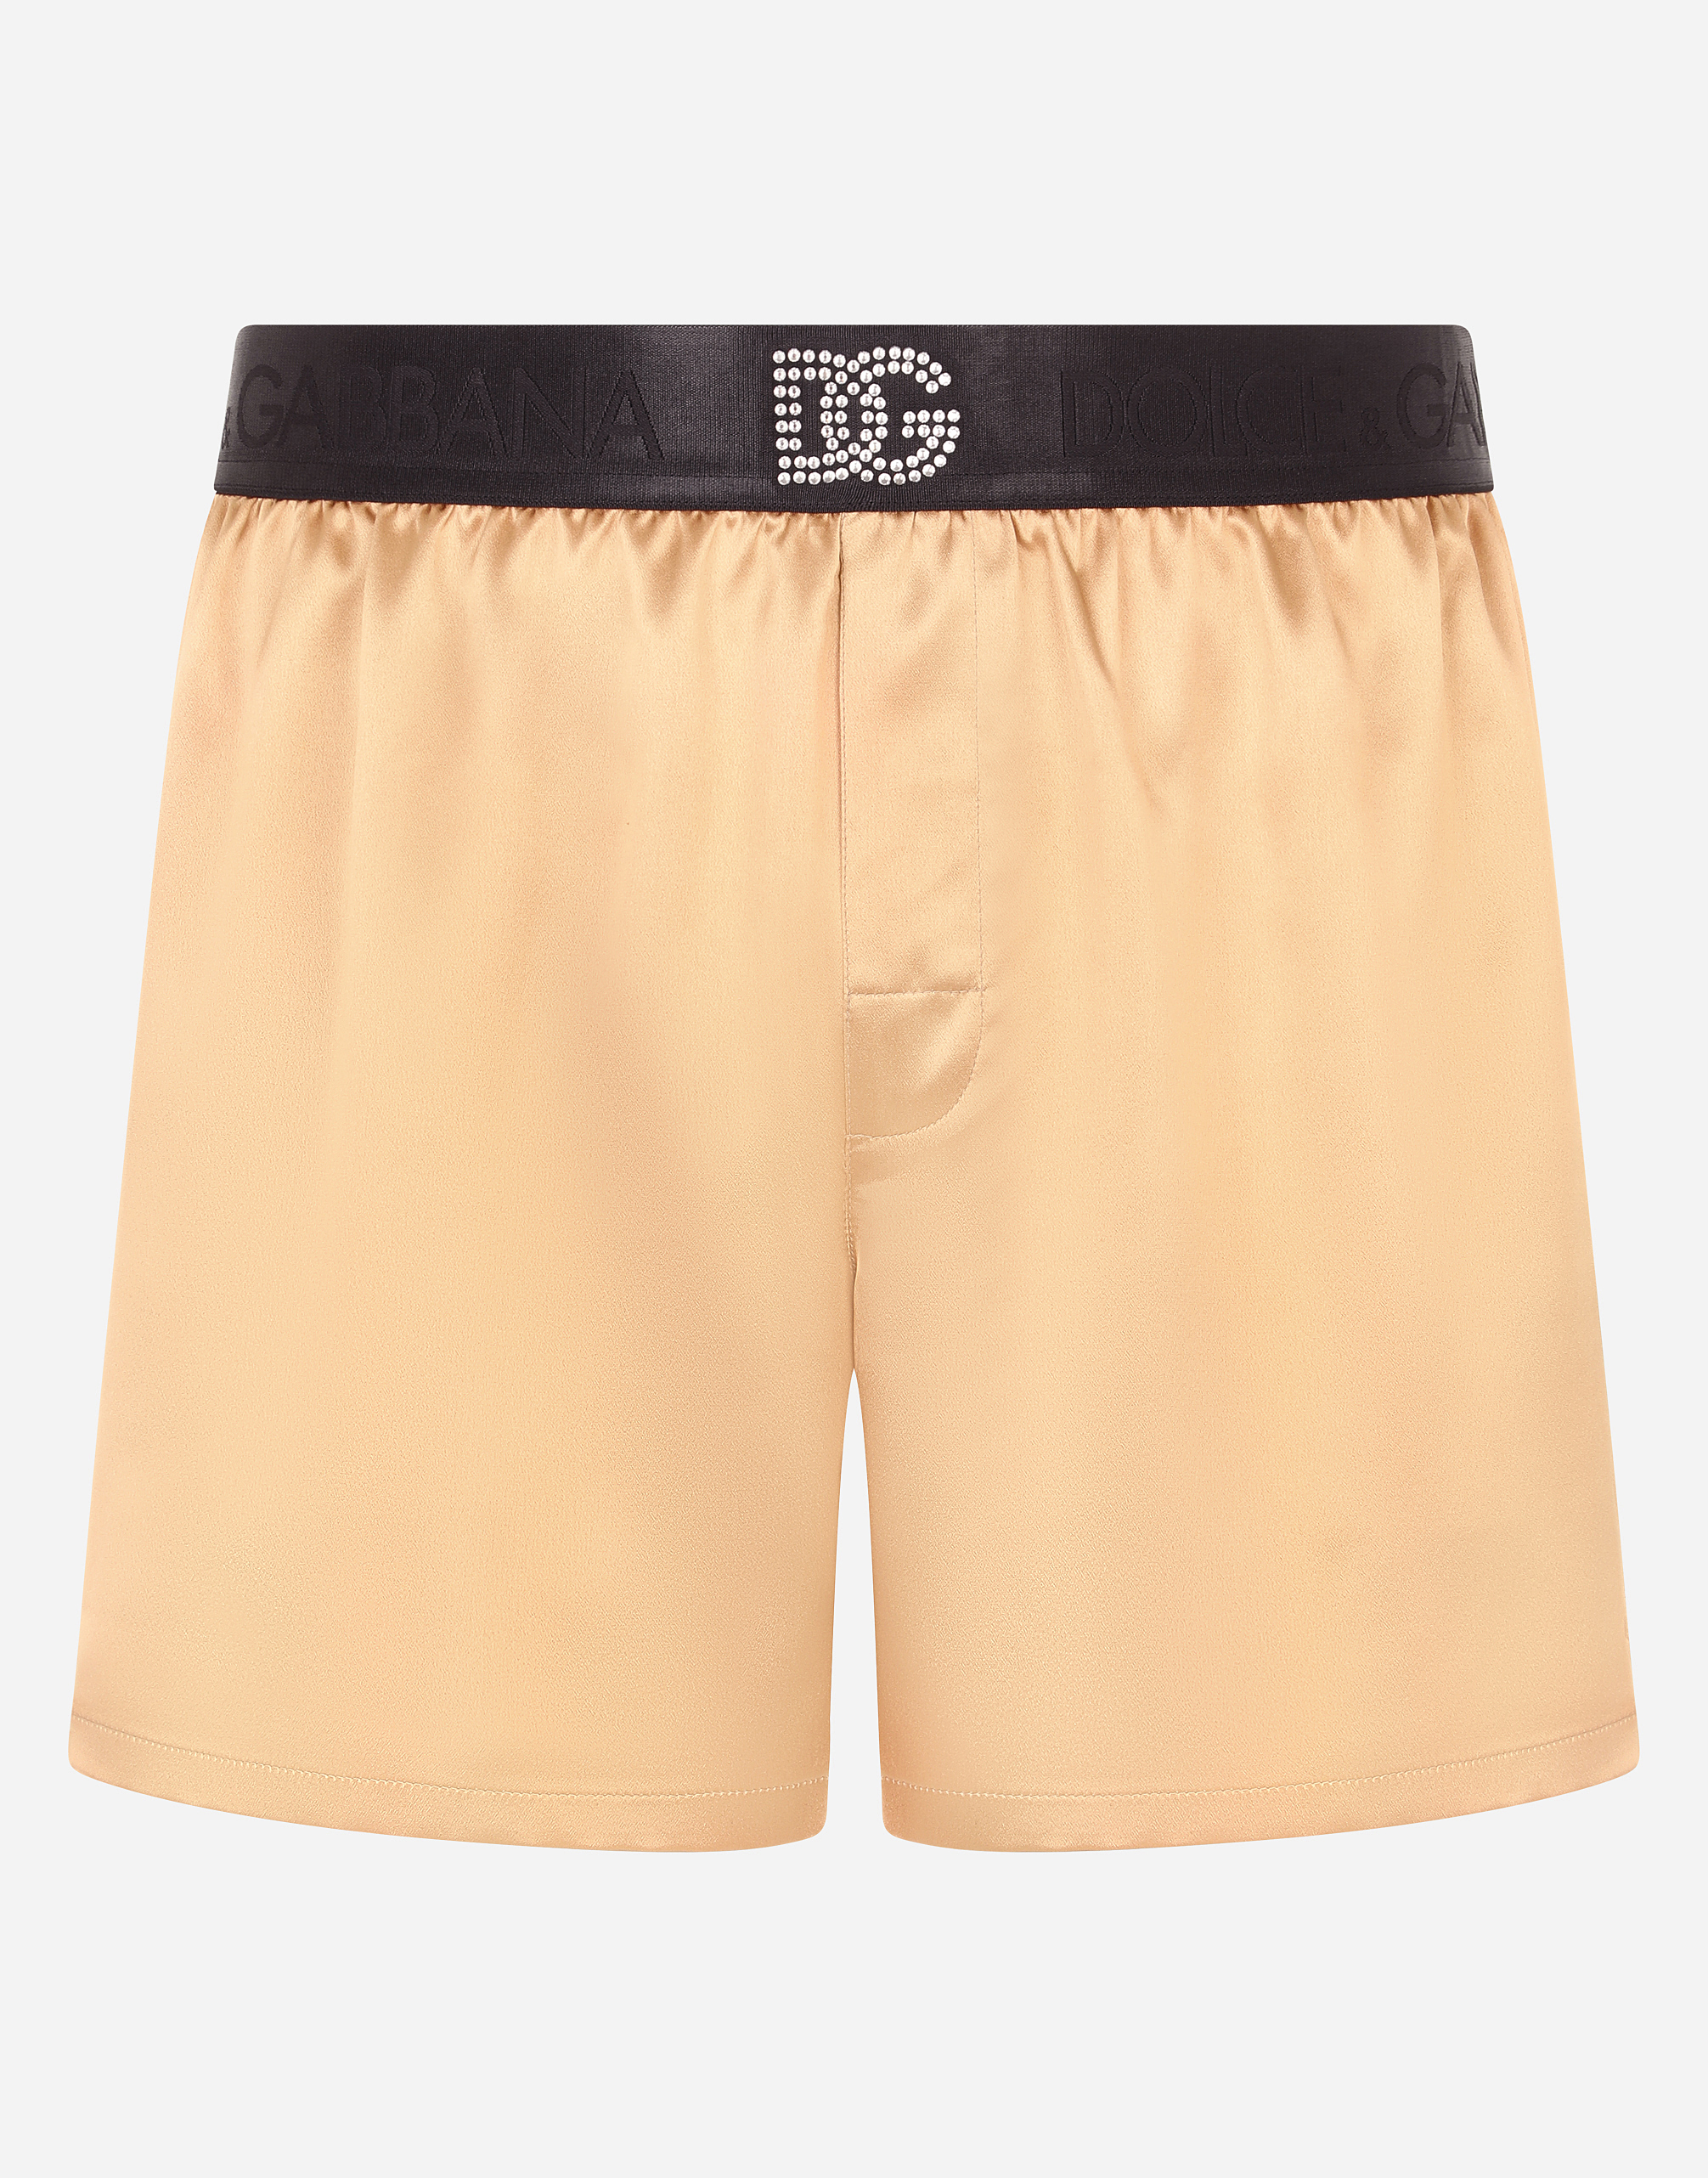 Silk shorts with DG logo and sleep mask in Gold